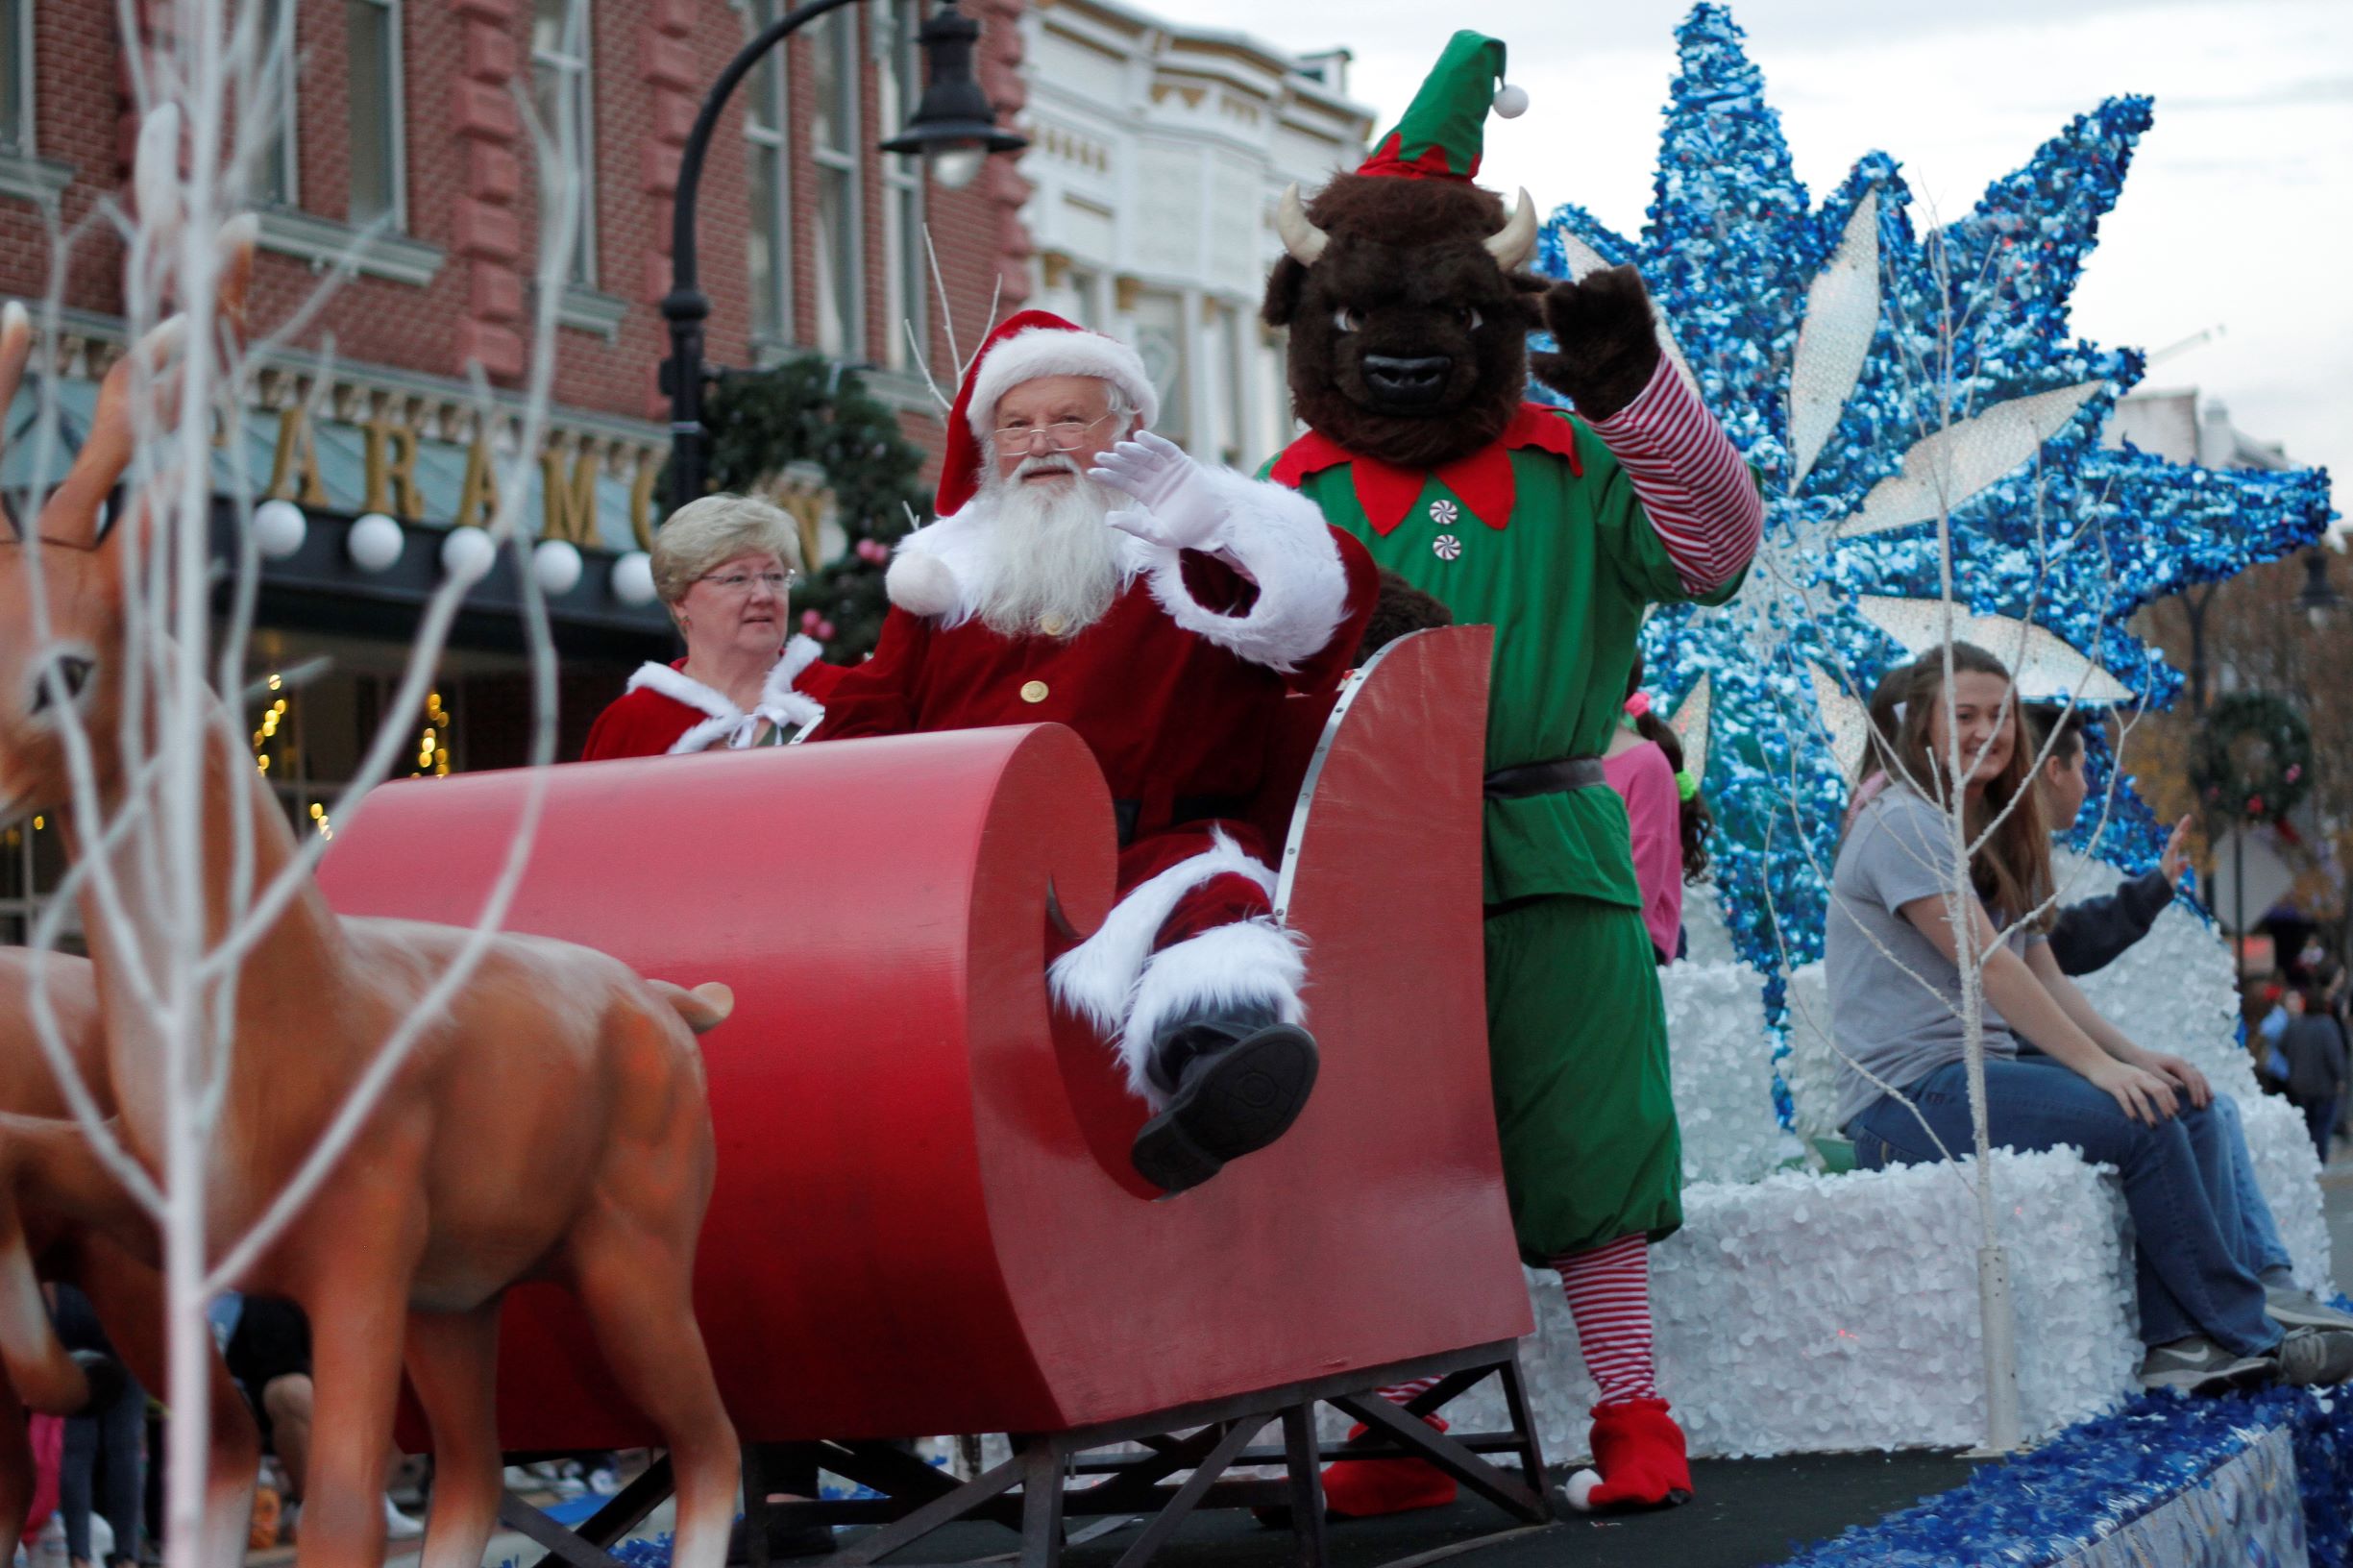 Goldsboro Christmas Parade Delights Thousands (PHOTO GALLERY)